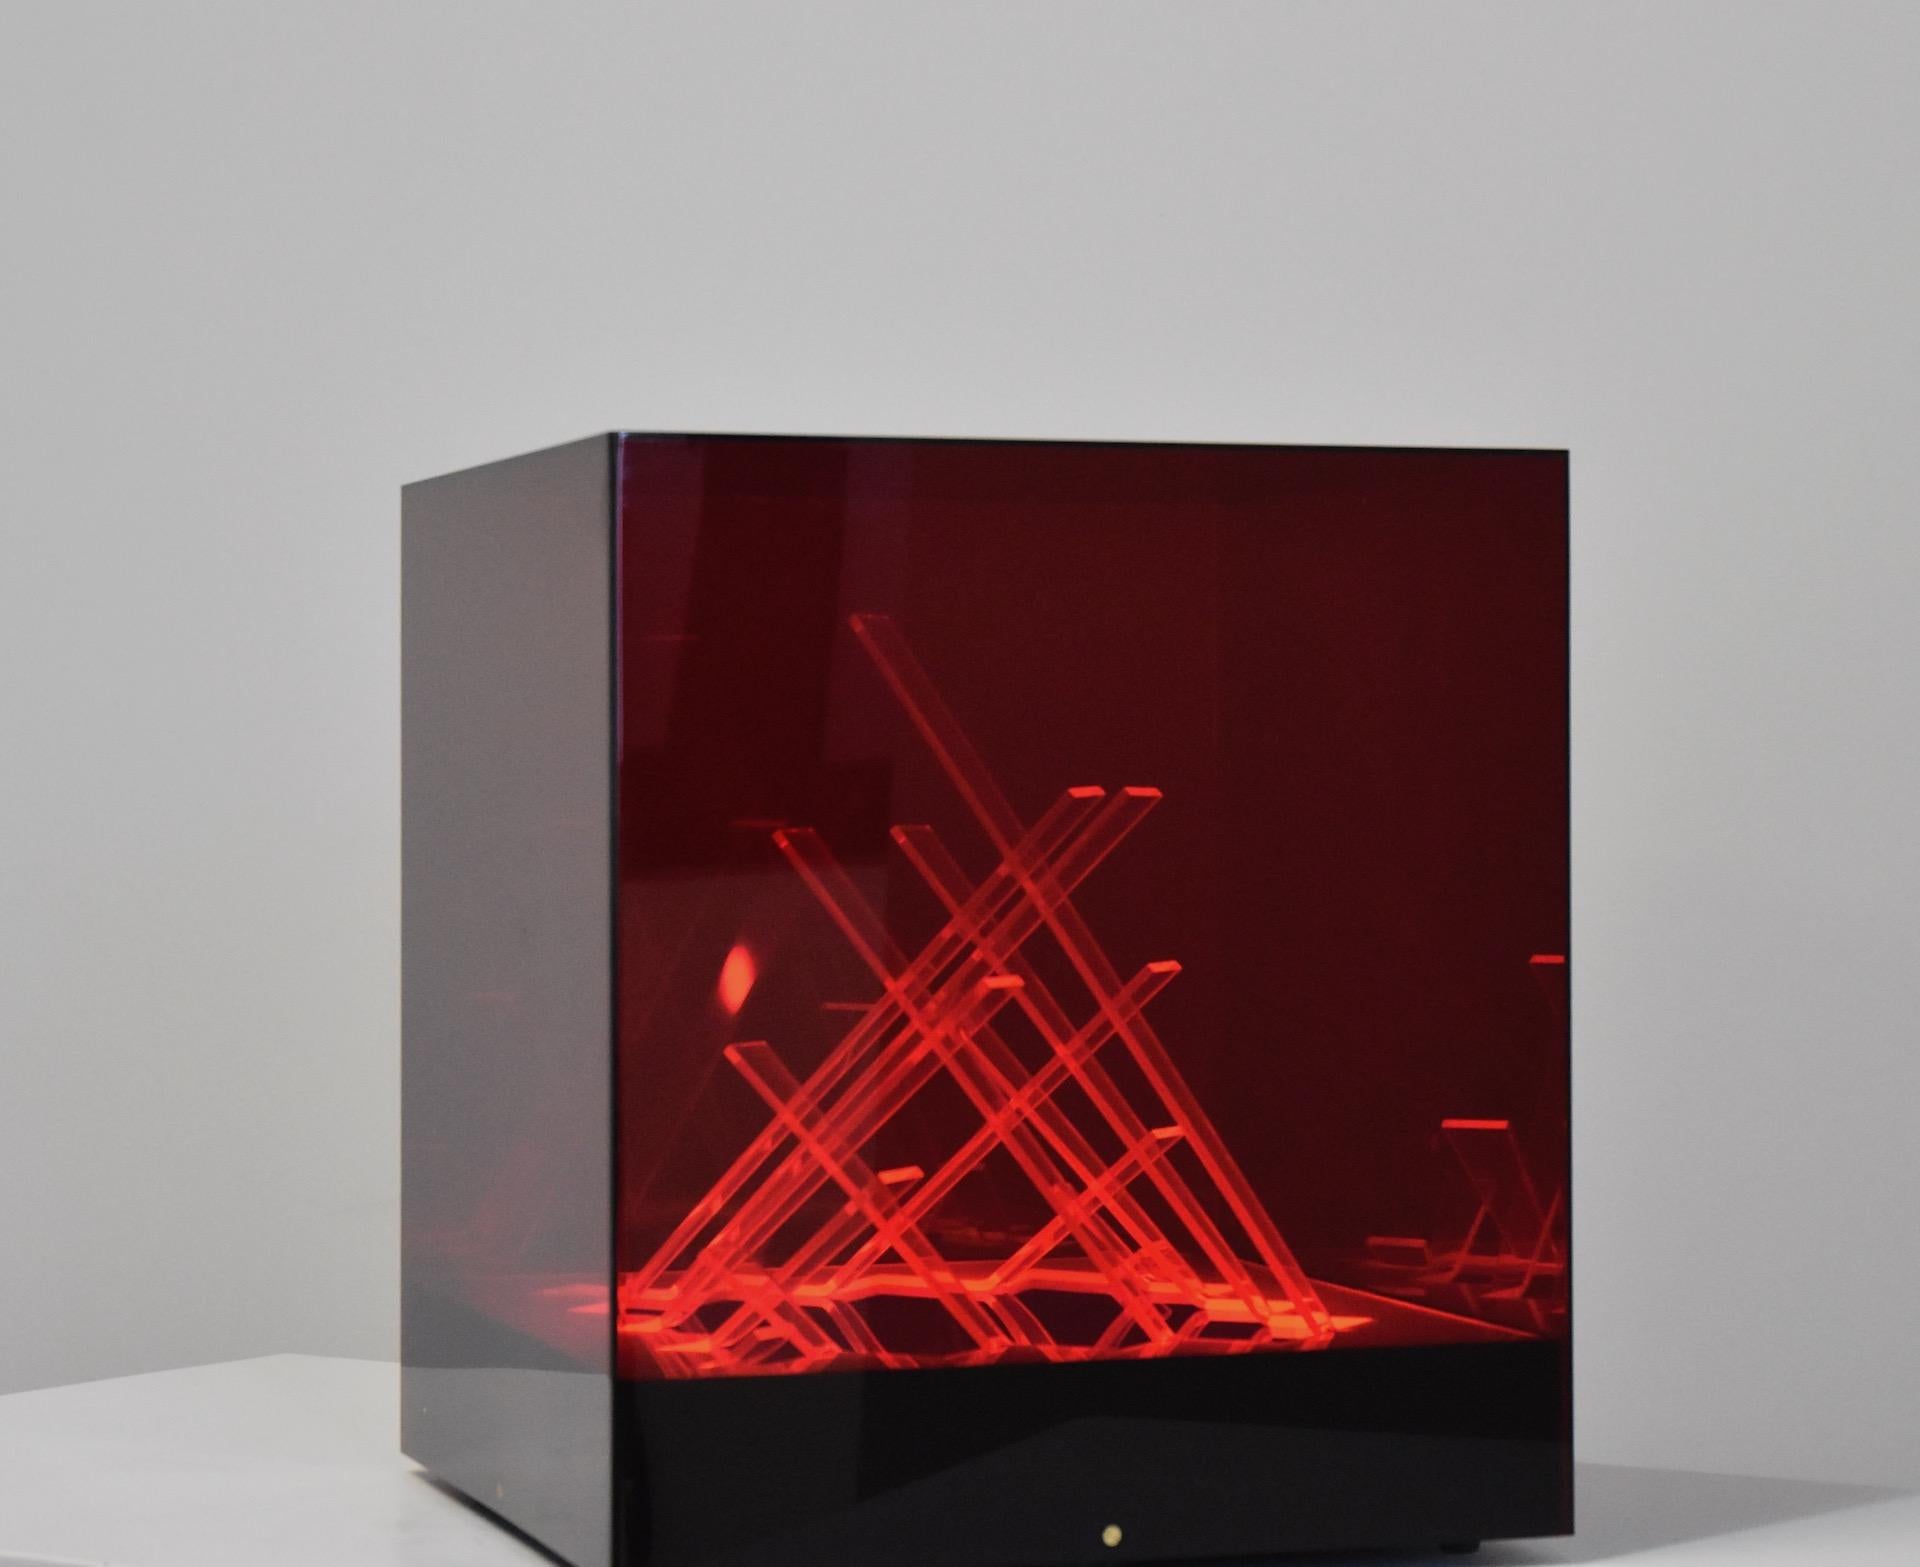 Rare Iluminated sculpture named Cubo di Teo designed by James Rivière in 1970s and edited by Centro Ricerche di Arte Industria Lissone, Italy. Colored acrylic pieces and base with internal light.